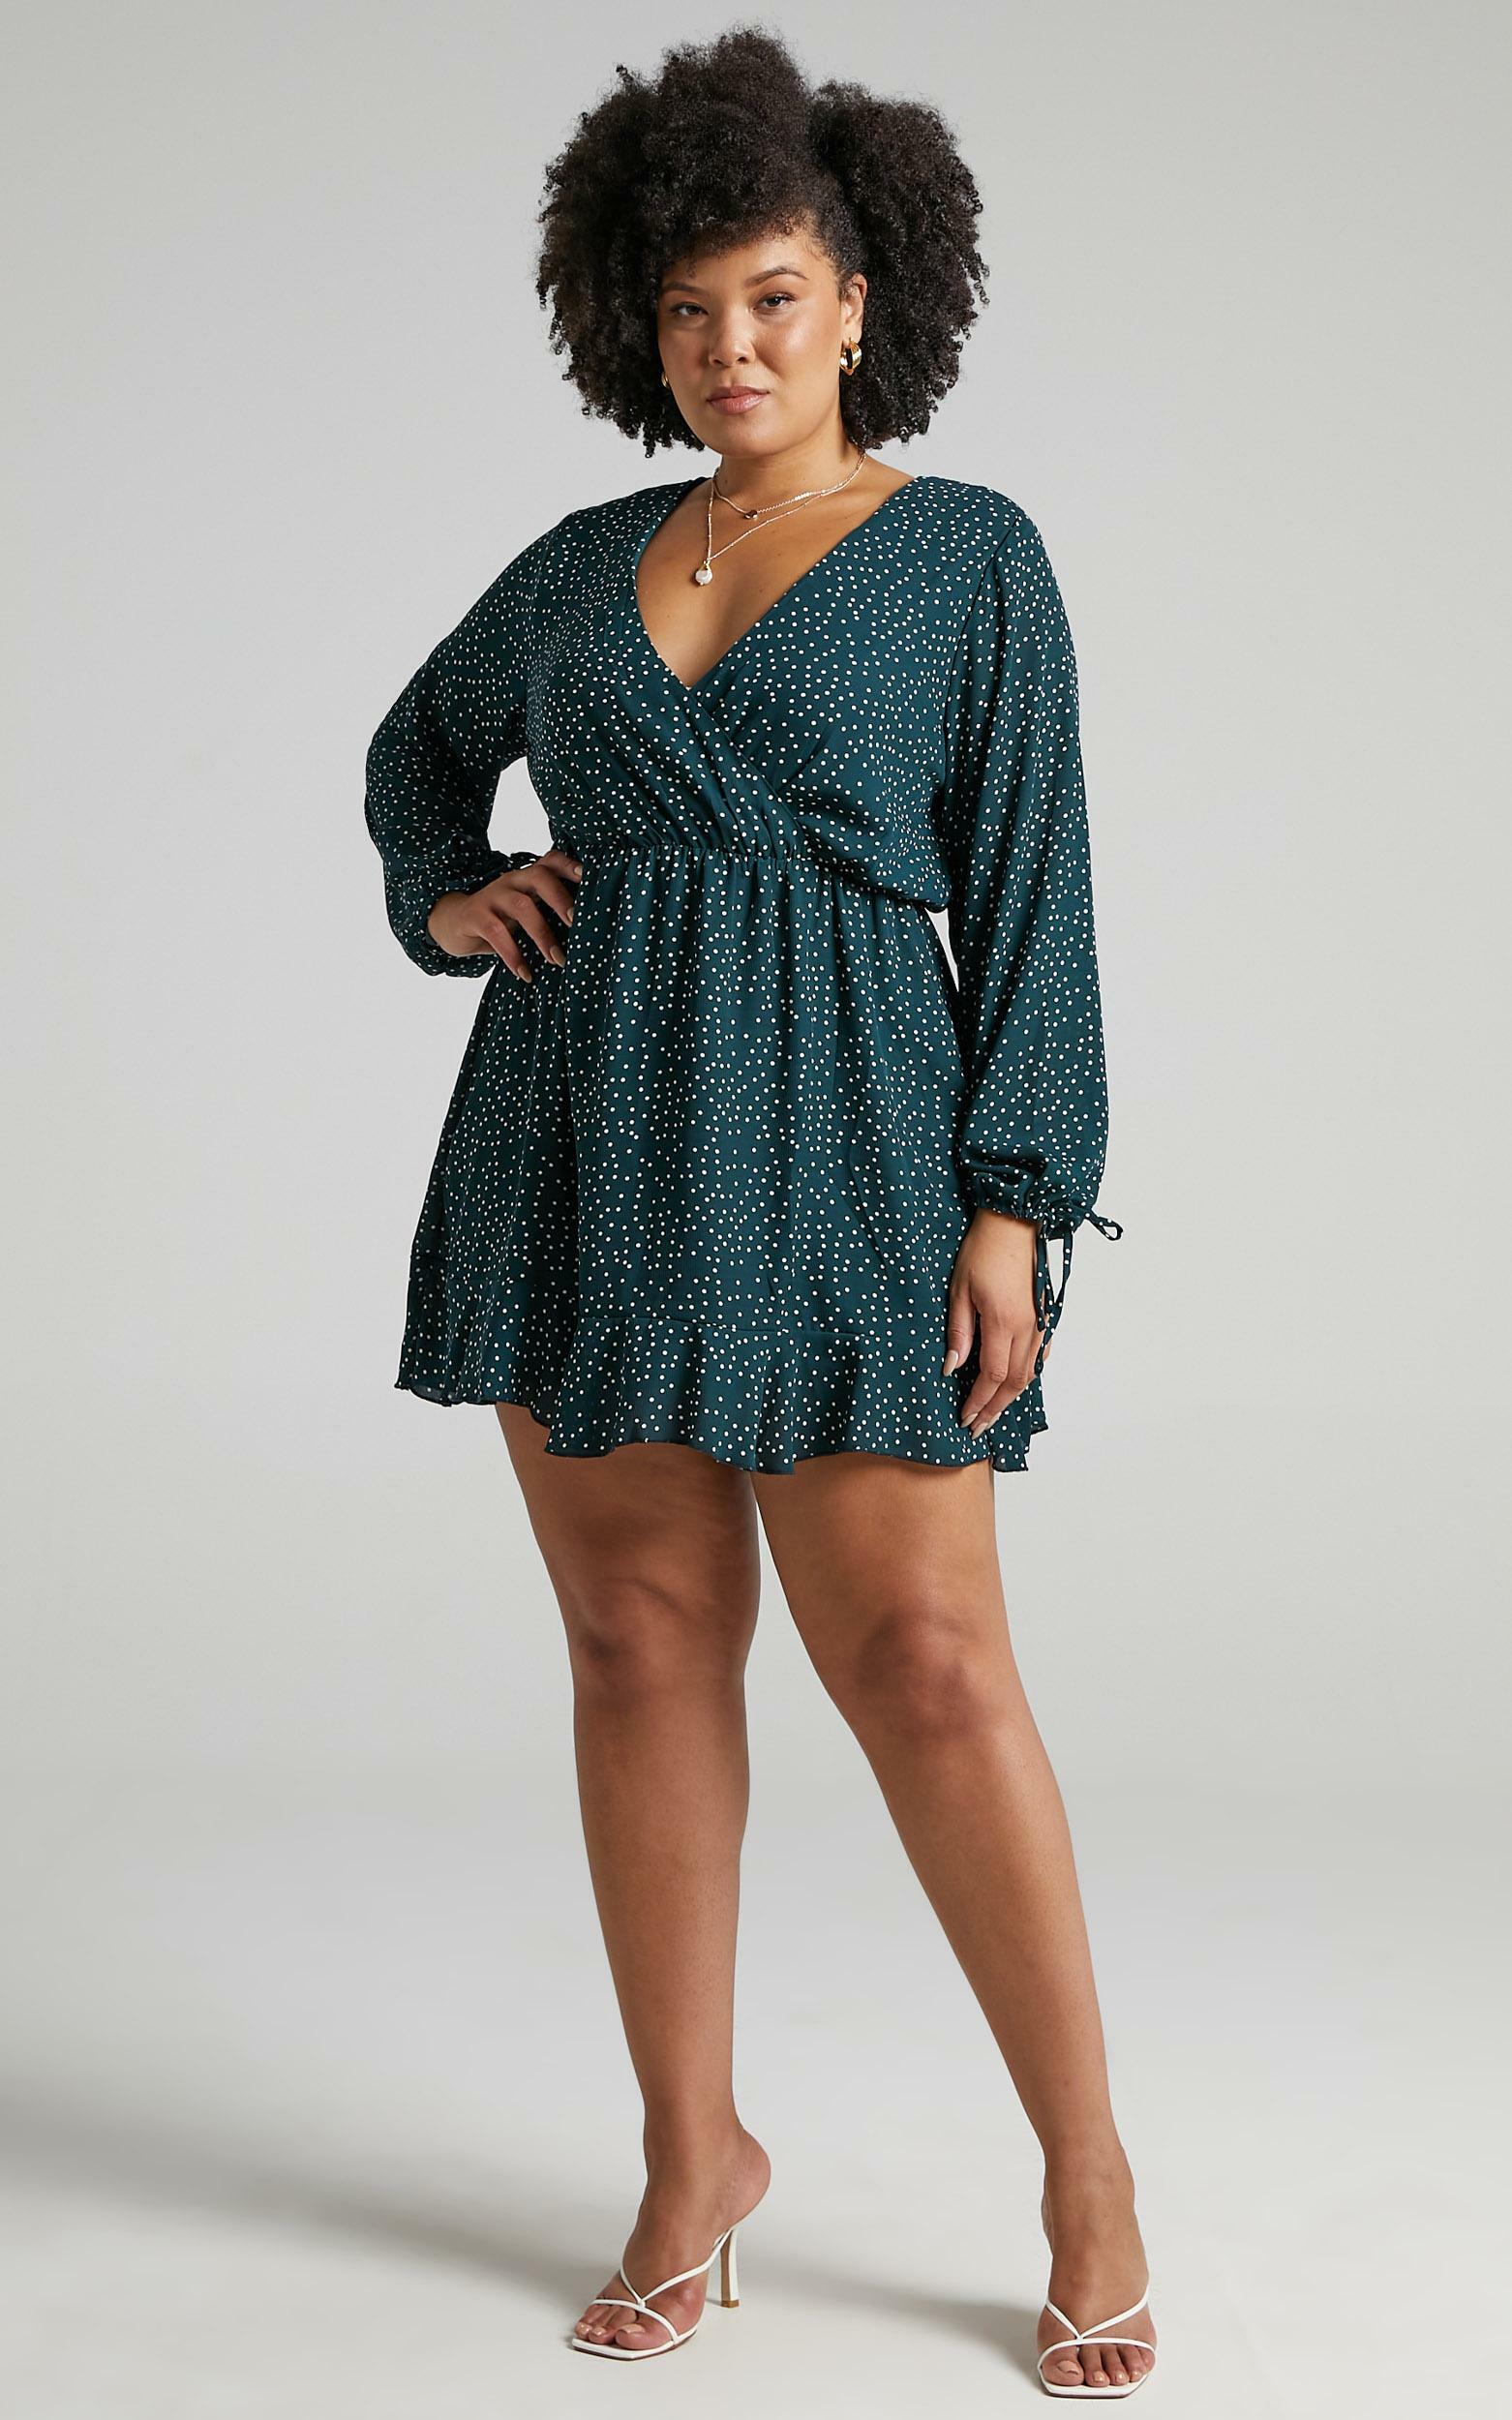 Keep It Smart Long Sleeve Mini Dress in Emerald Spot - 20, GRN1, hi-res image number null